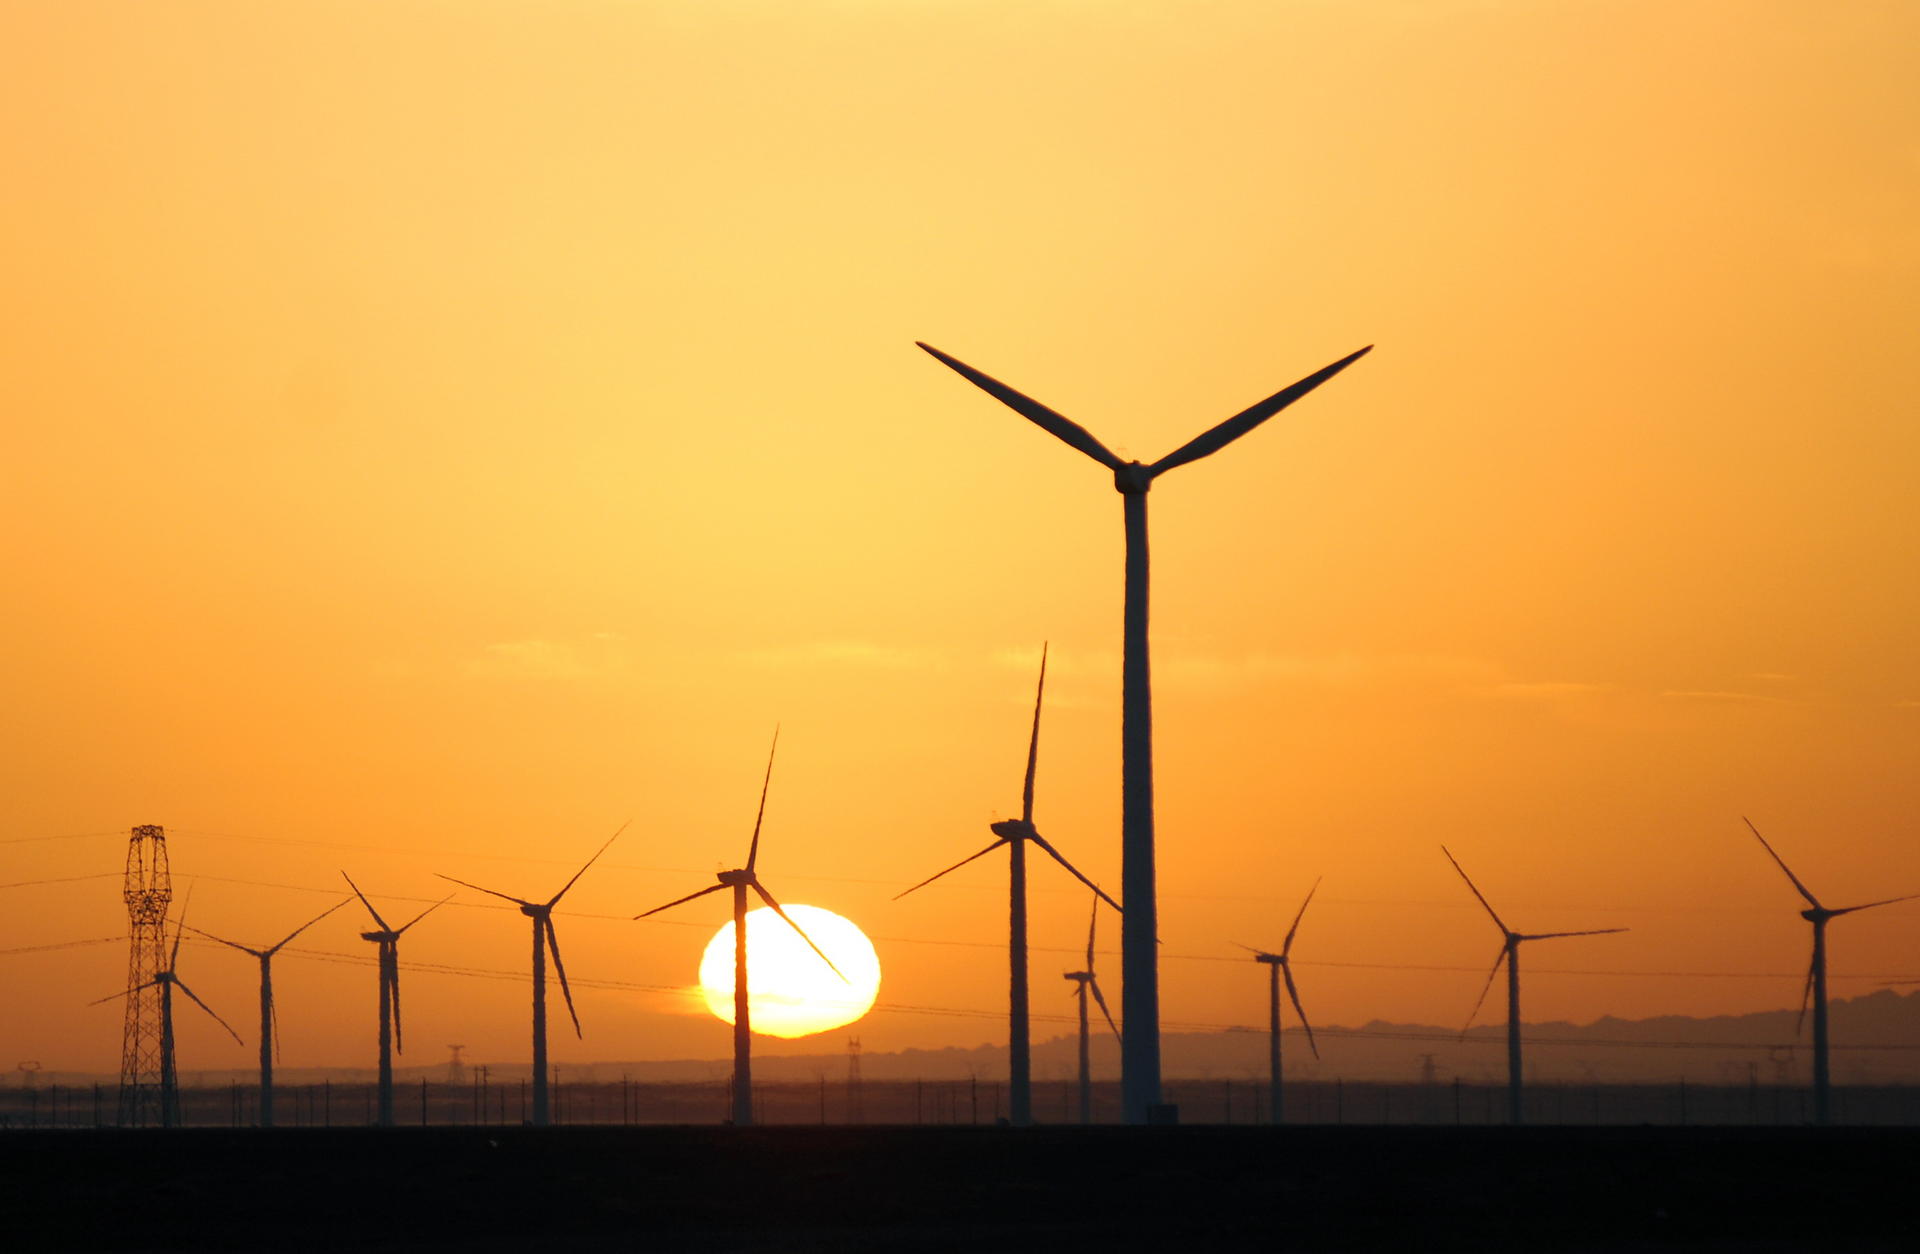 China accounted for 40 per cent of all new wind power capacity worldwide last year. Photo: Xinhua